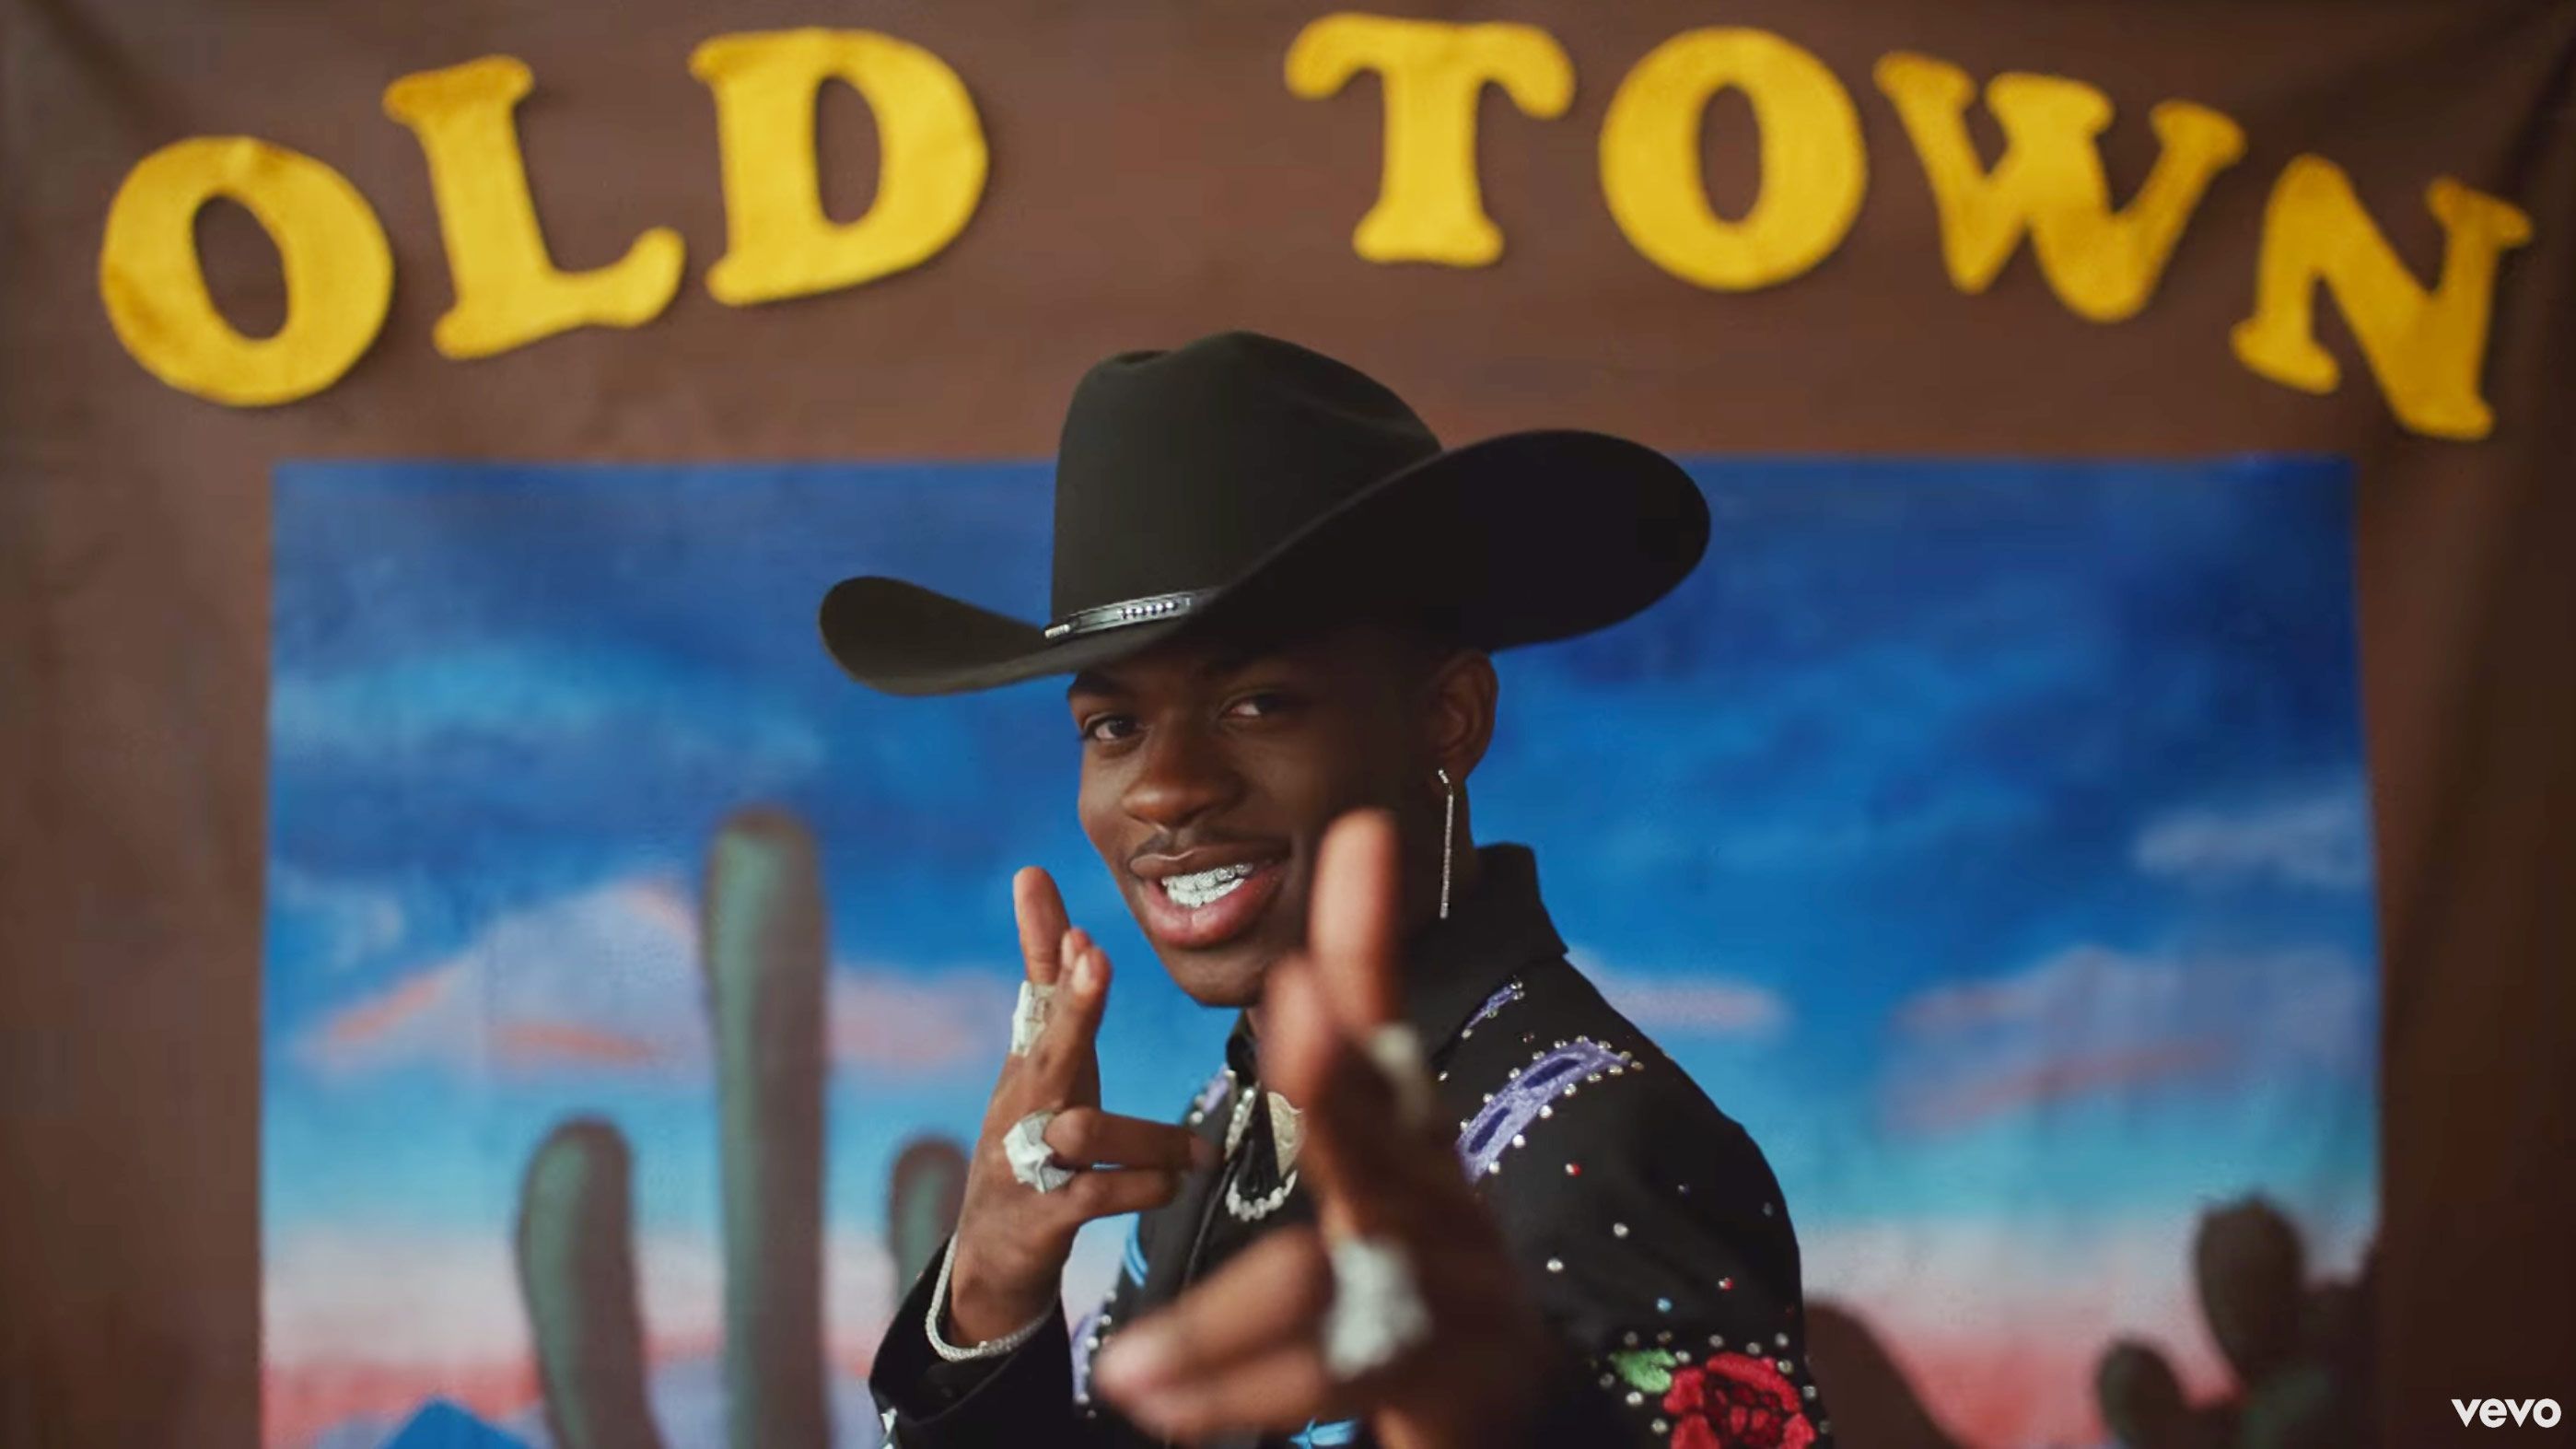 Every Yeehaw Look From the 'Old Town Road' Video